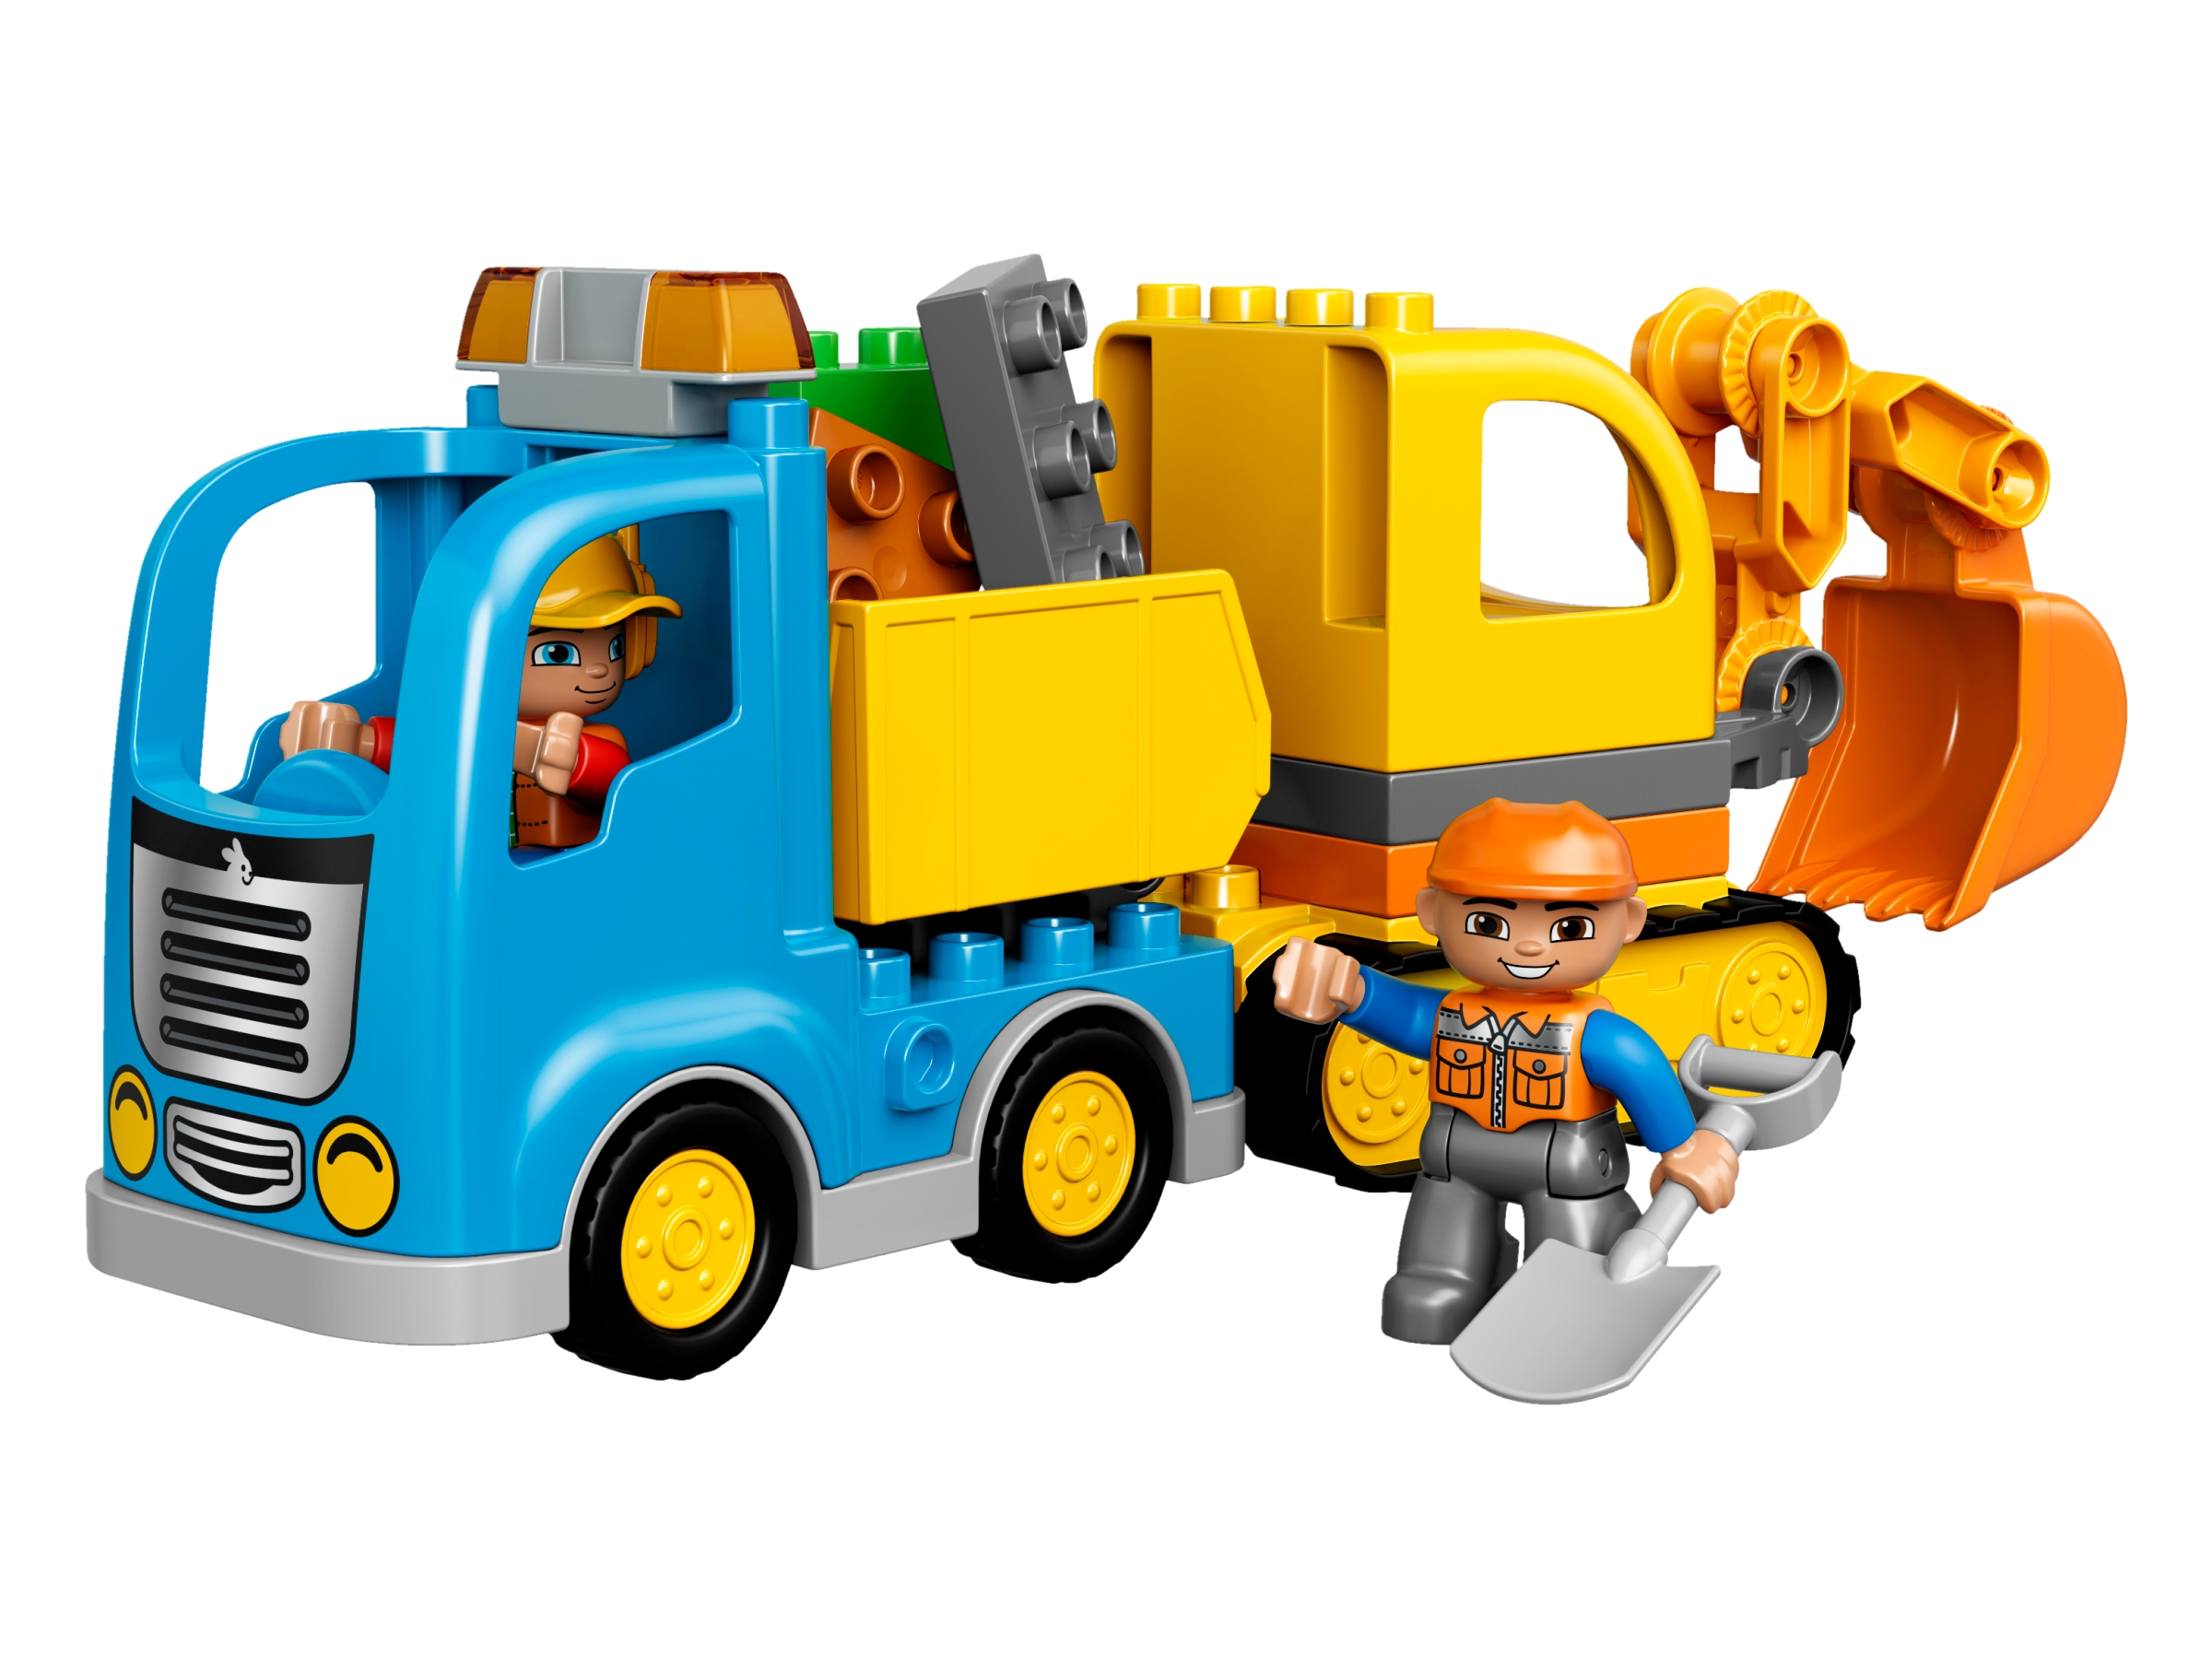 LEGO DUPLO Town Truck & Tracked Excavator Paraguay